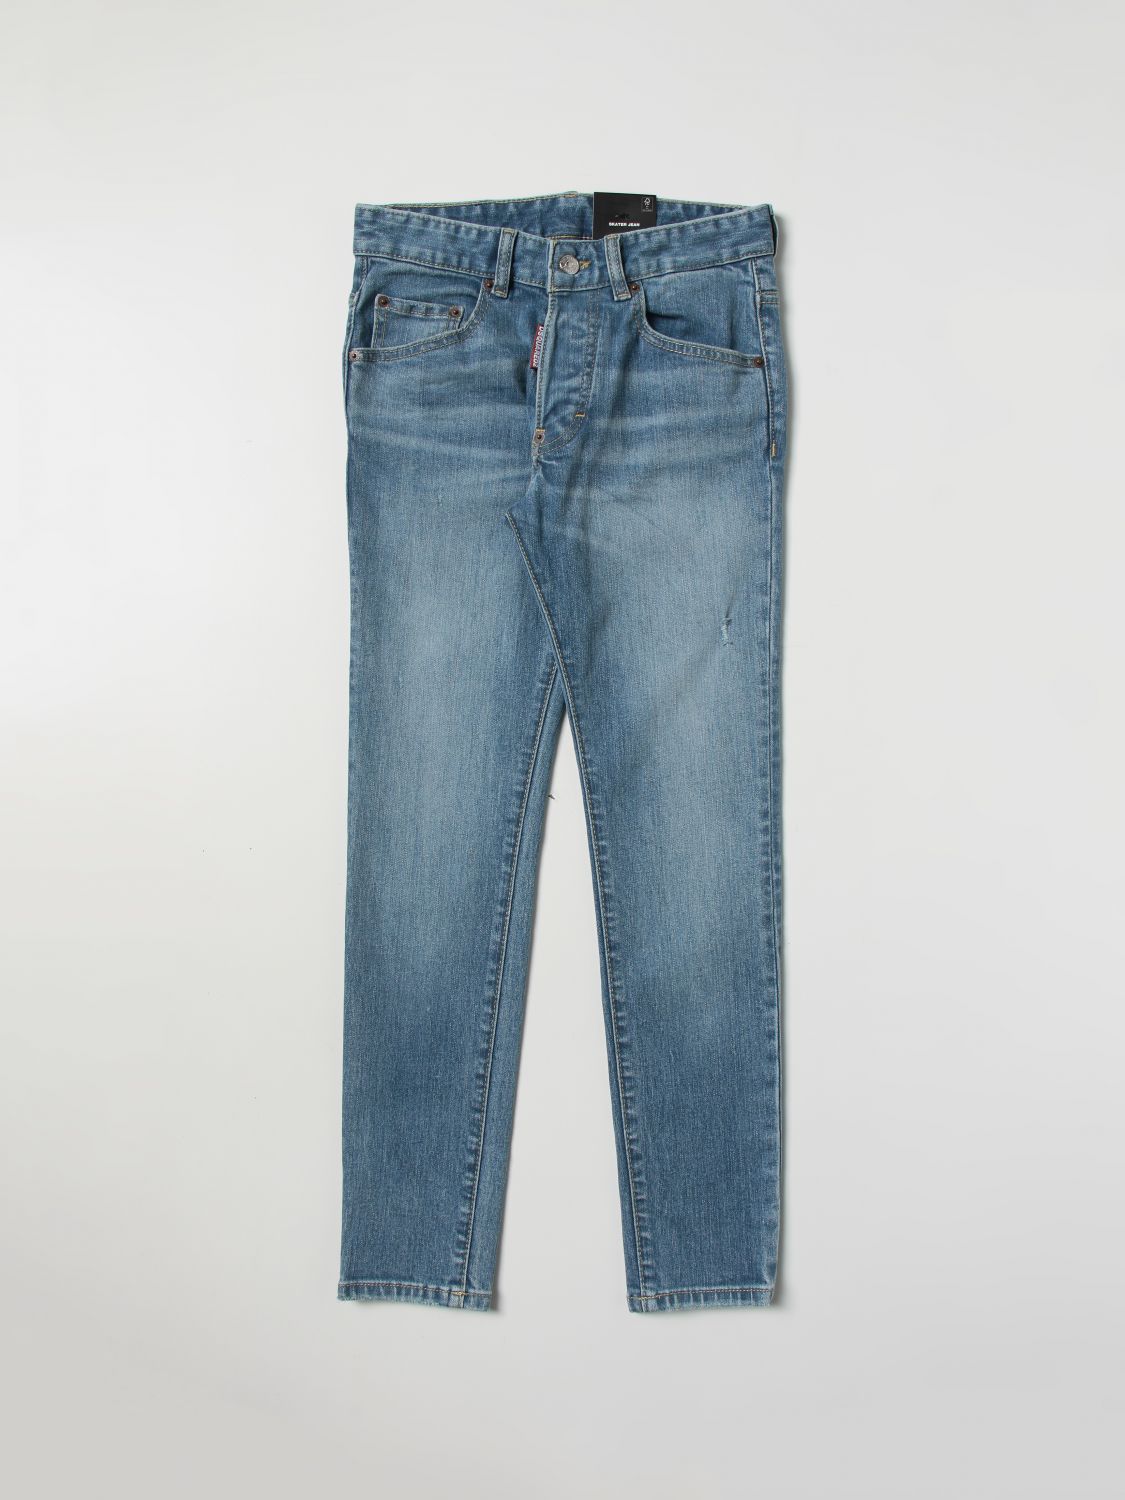 Dsquared2 Junior Jeans  Kids Colour Stone Washed